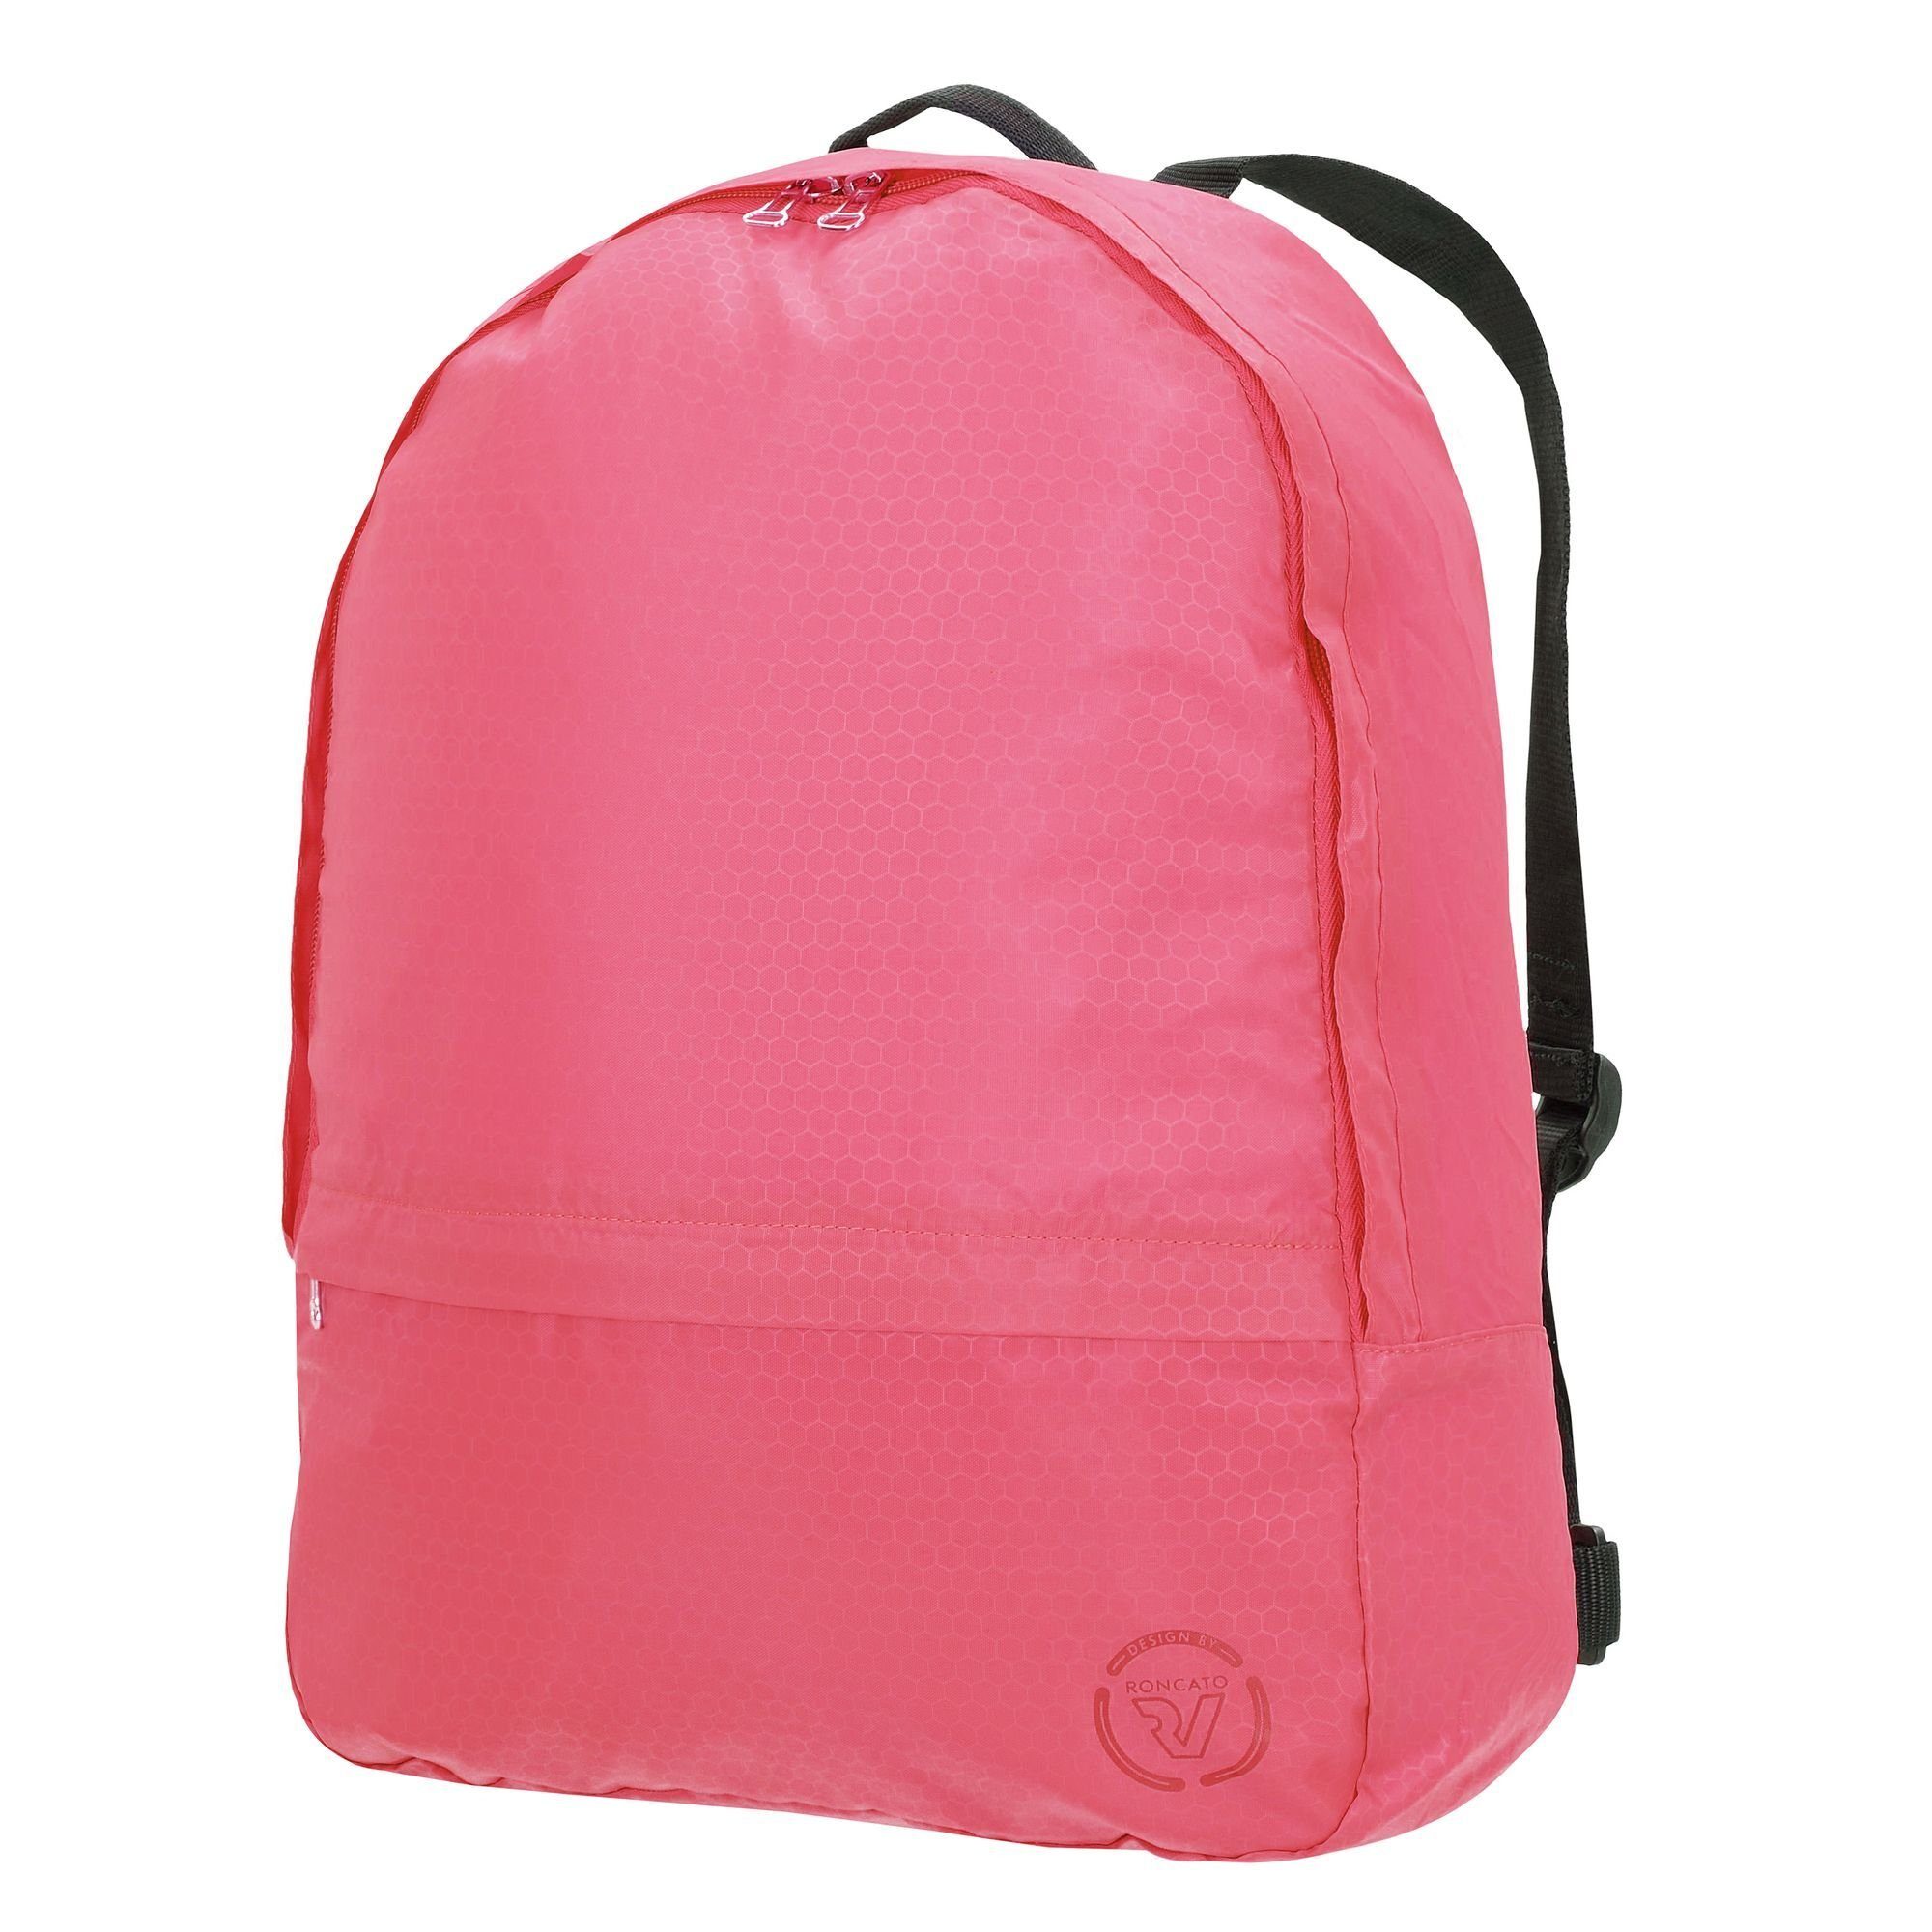 pink RONCATO Foldable Accessoires, Polyester Cityrucksack